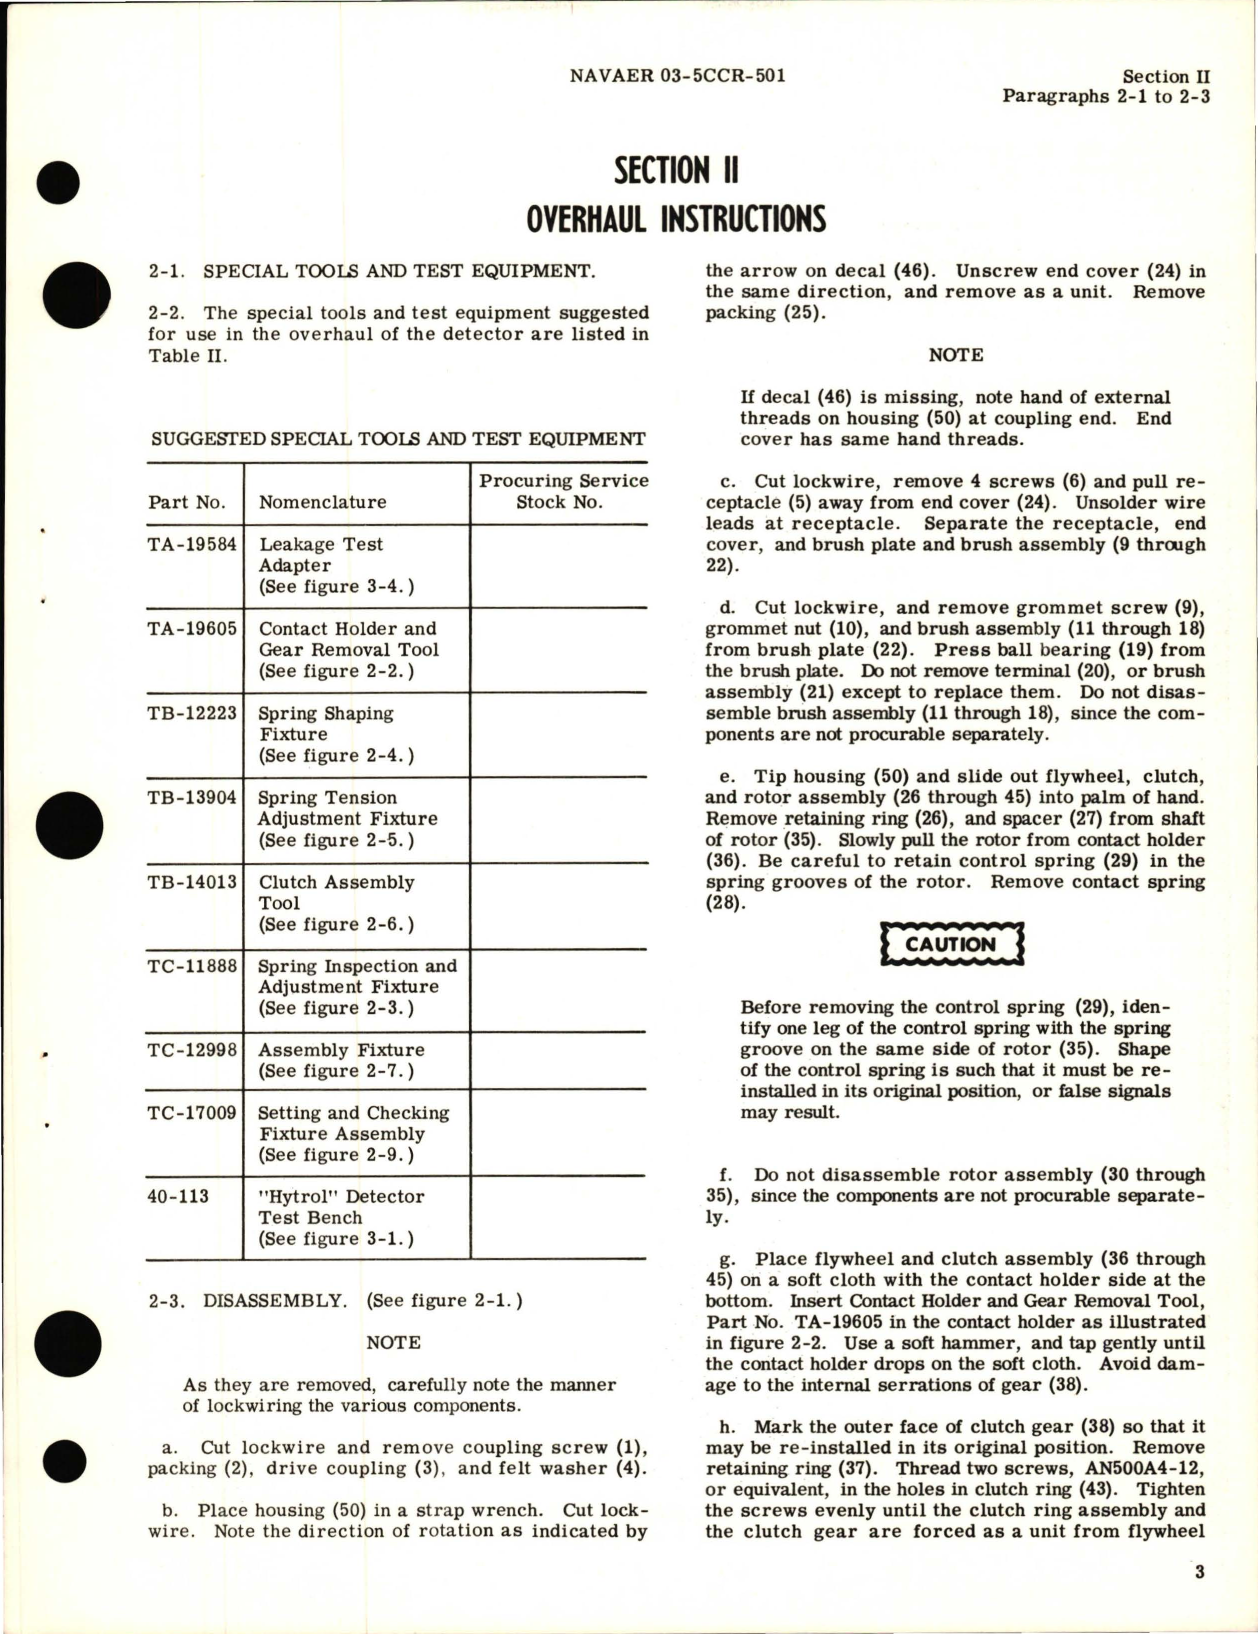 Sample page 5 from AirCorps Library document: Overhaul Instructions for Skid and Locked Wheel Detector Assemblies - 5823 Part Series